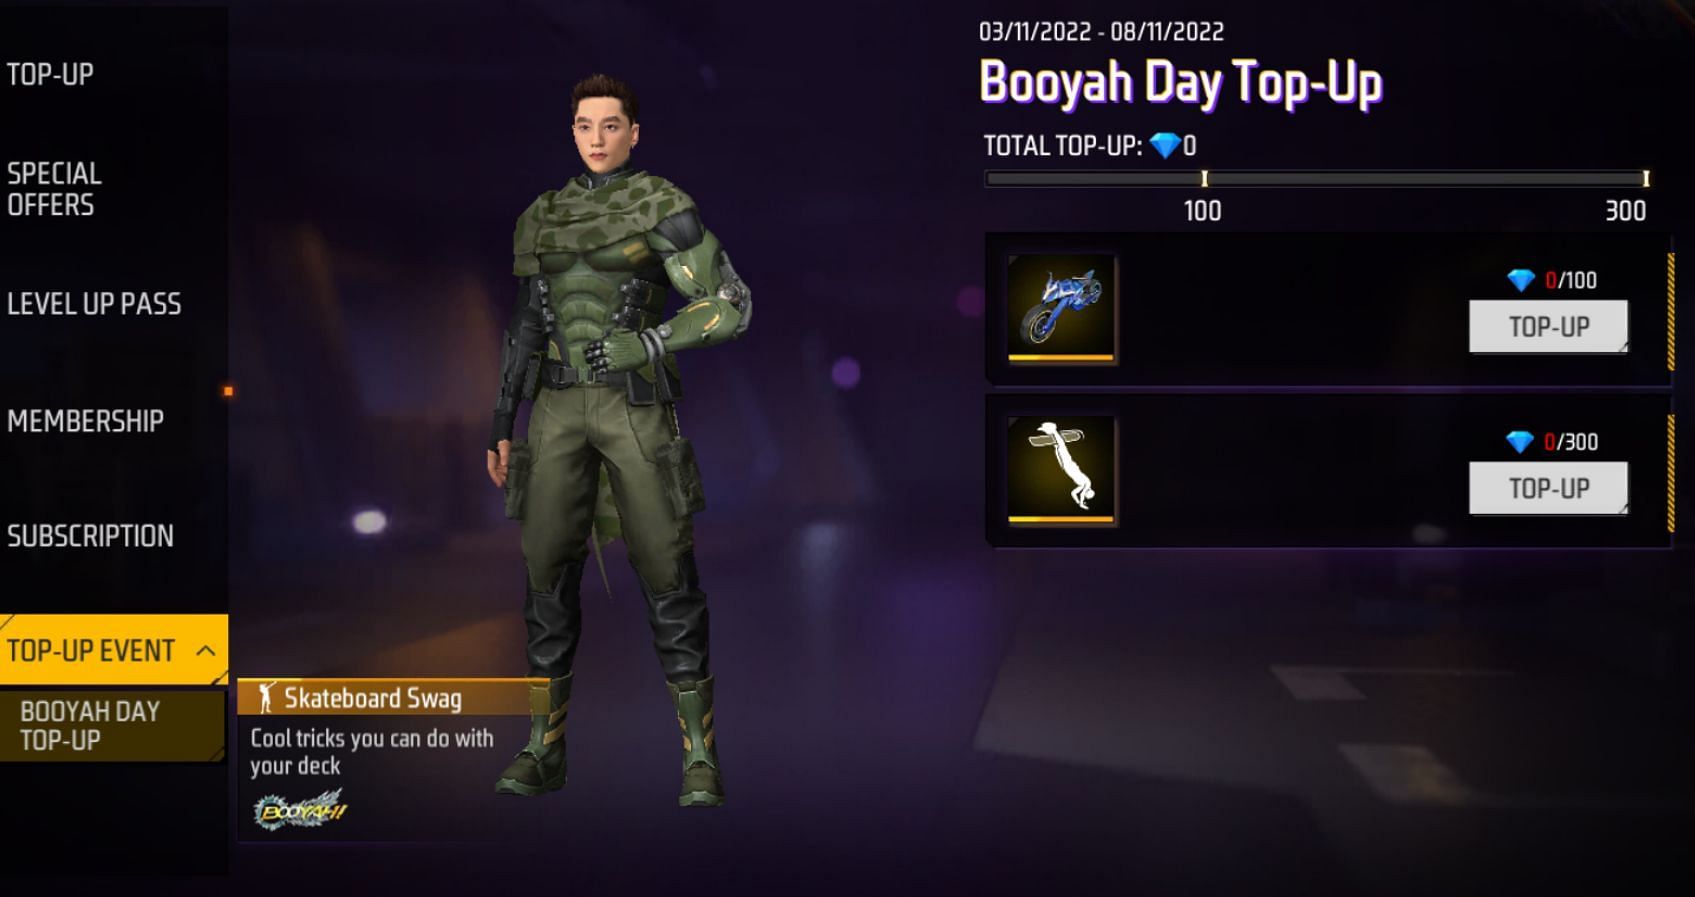 Claim rewards from the Booyah Day Top-Up event after purchasing diamonds (Image via Garena)